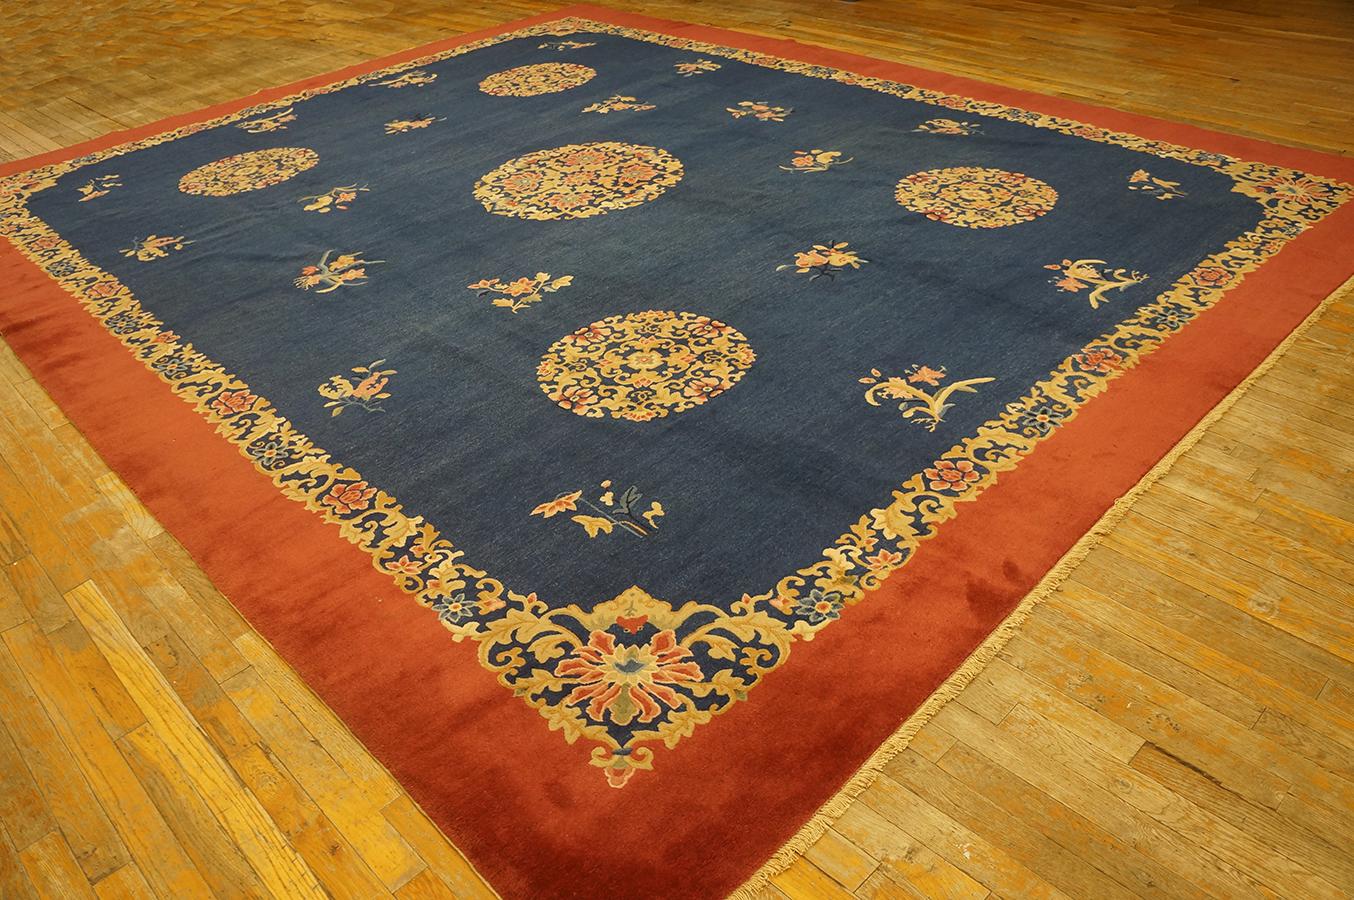 Early 20th Century Chinese Peking Carpet ( 11' x 13'6'' - 335 x 412 ) In Good Condition For Sale In New York, NY